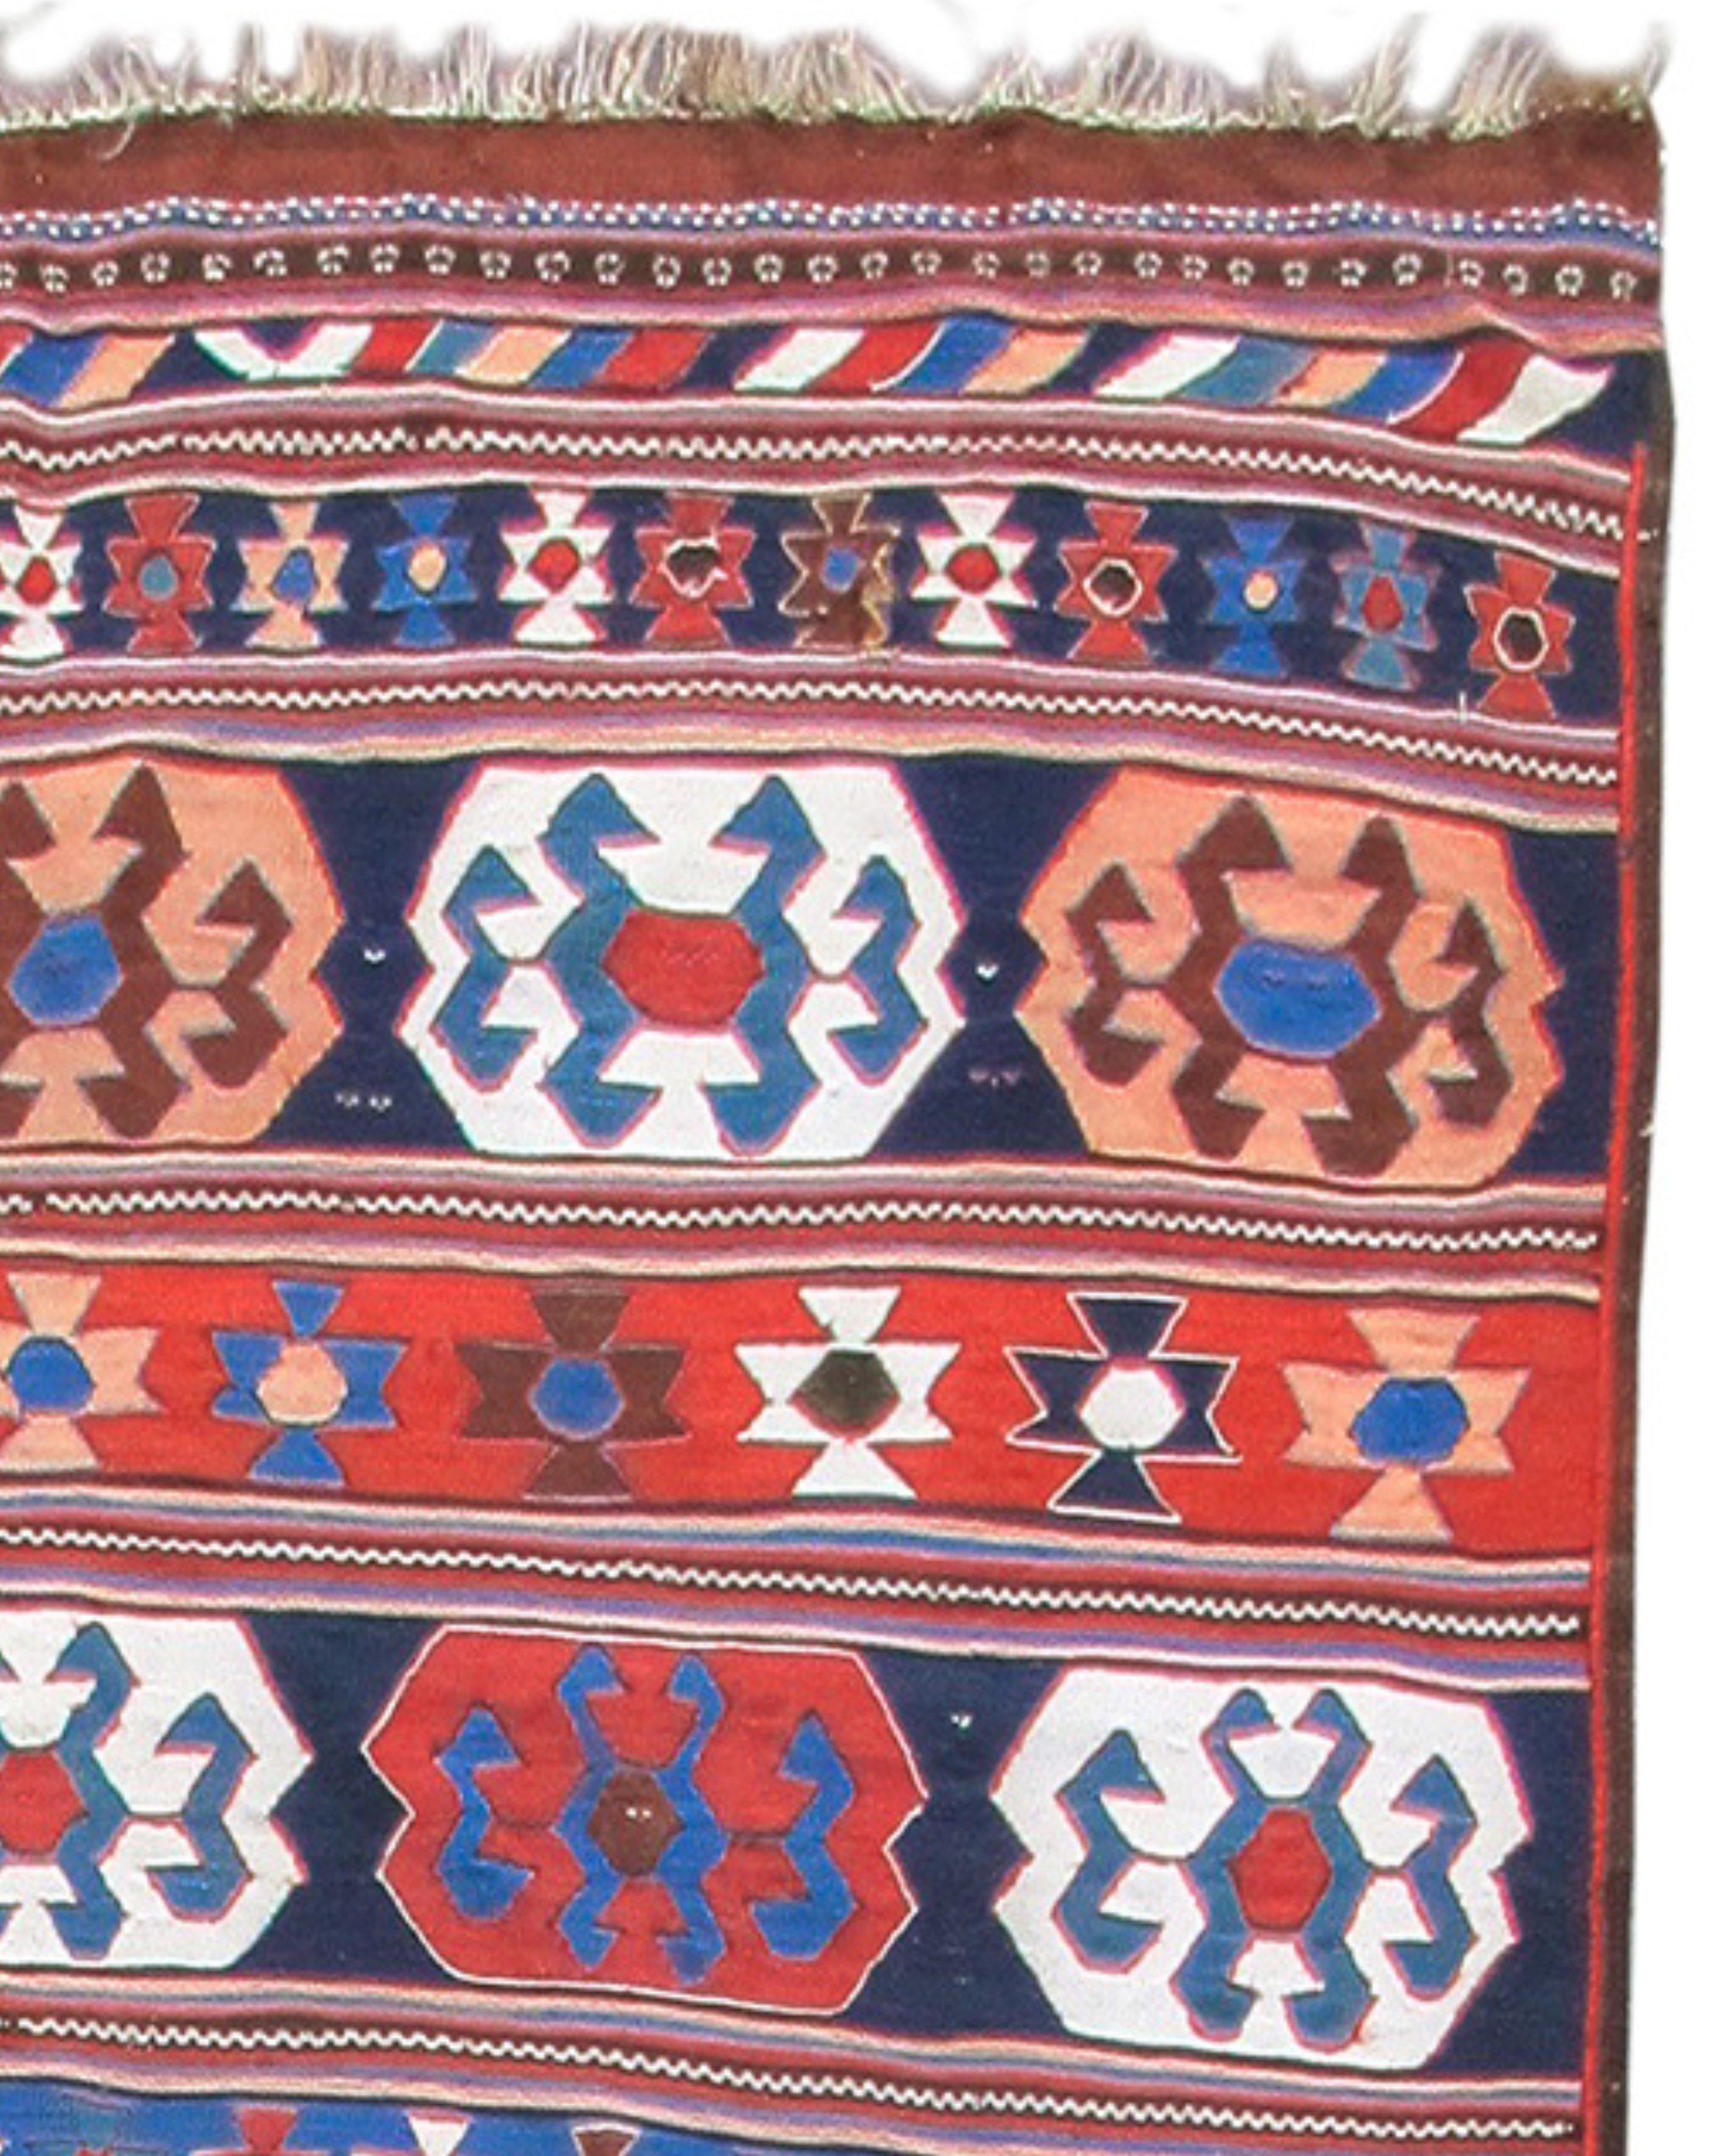 Antique Persian Veramin Kilim Rug, Late 19th Century

Veramin is an old caravan town located just outside of Tehran. During the 19th century, various tribal groups from across western Persia settled here and joined to create a discernibly Veramin